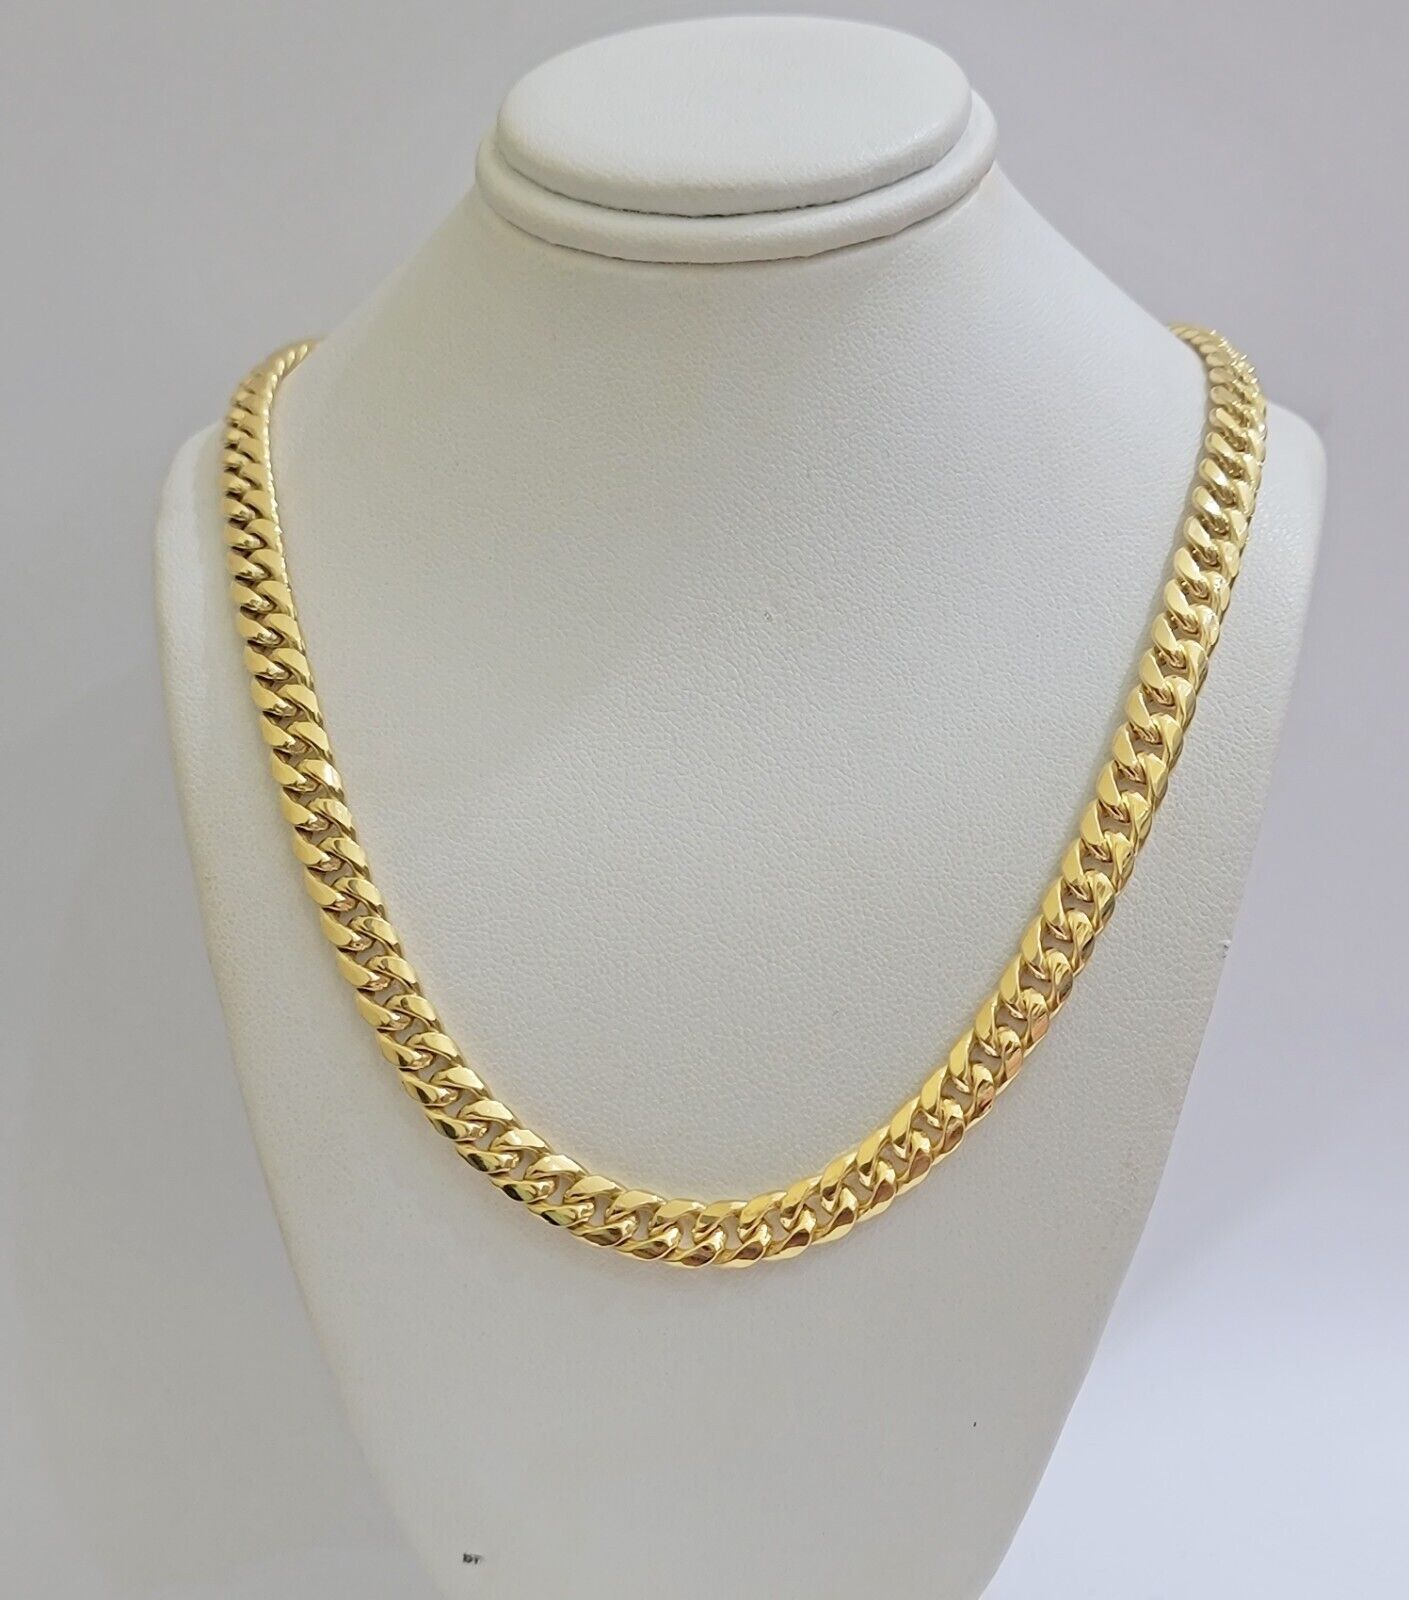 10k Gold Chain necklace 6mm Miami Cuban Link 20